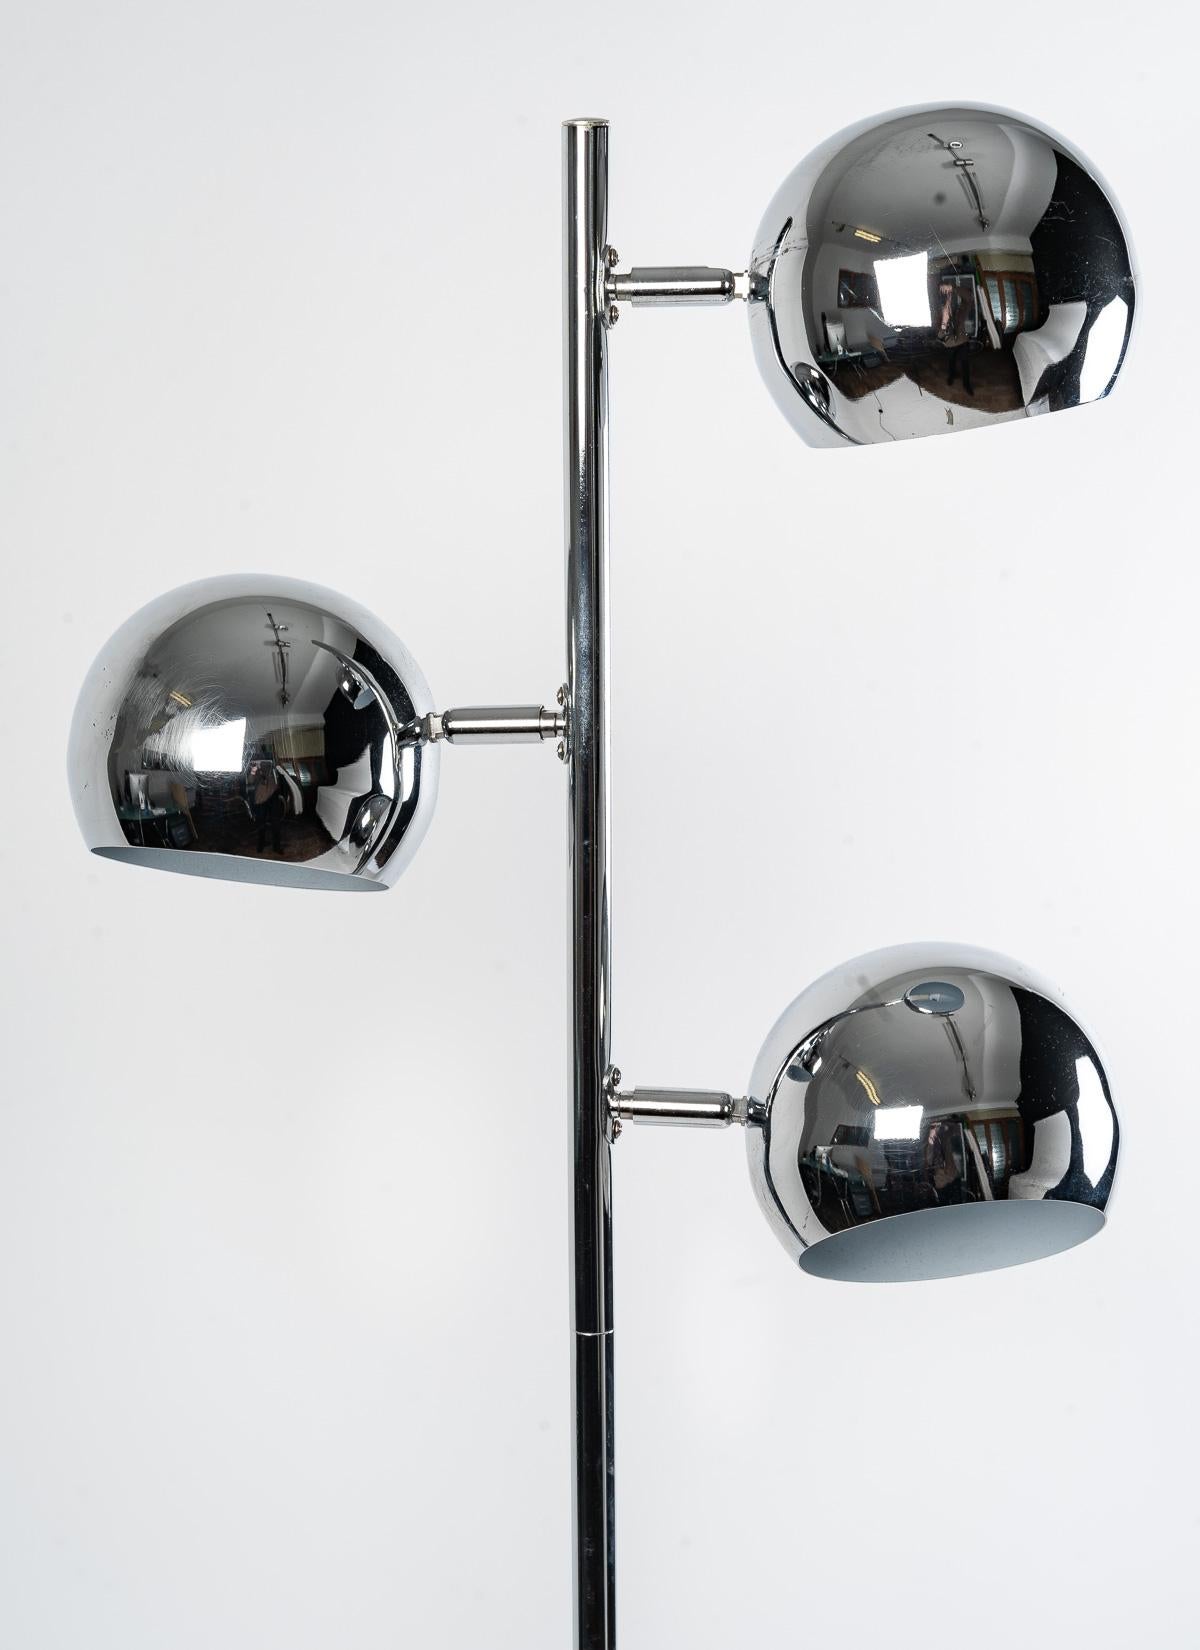 Floor lamp Design in the taste of the 1970s

Floor lamp in chromed metal, design in the taste of the 1970's, wear and small stripes, XXth century, 3 lights

Dimensions: h: 163cm, w: 44cm, d: 30cm